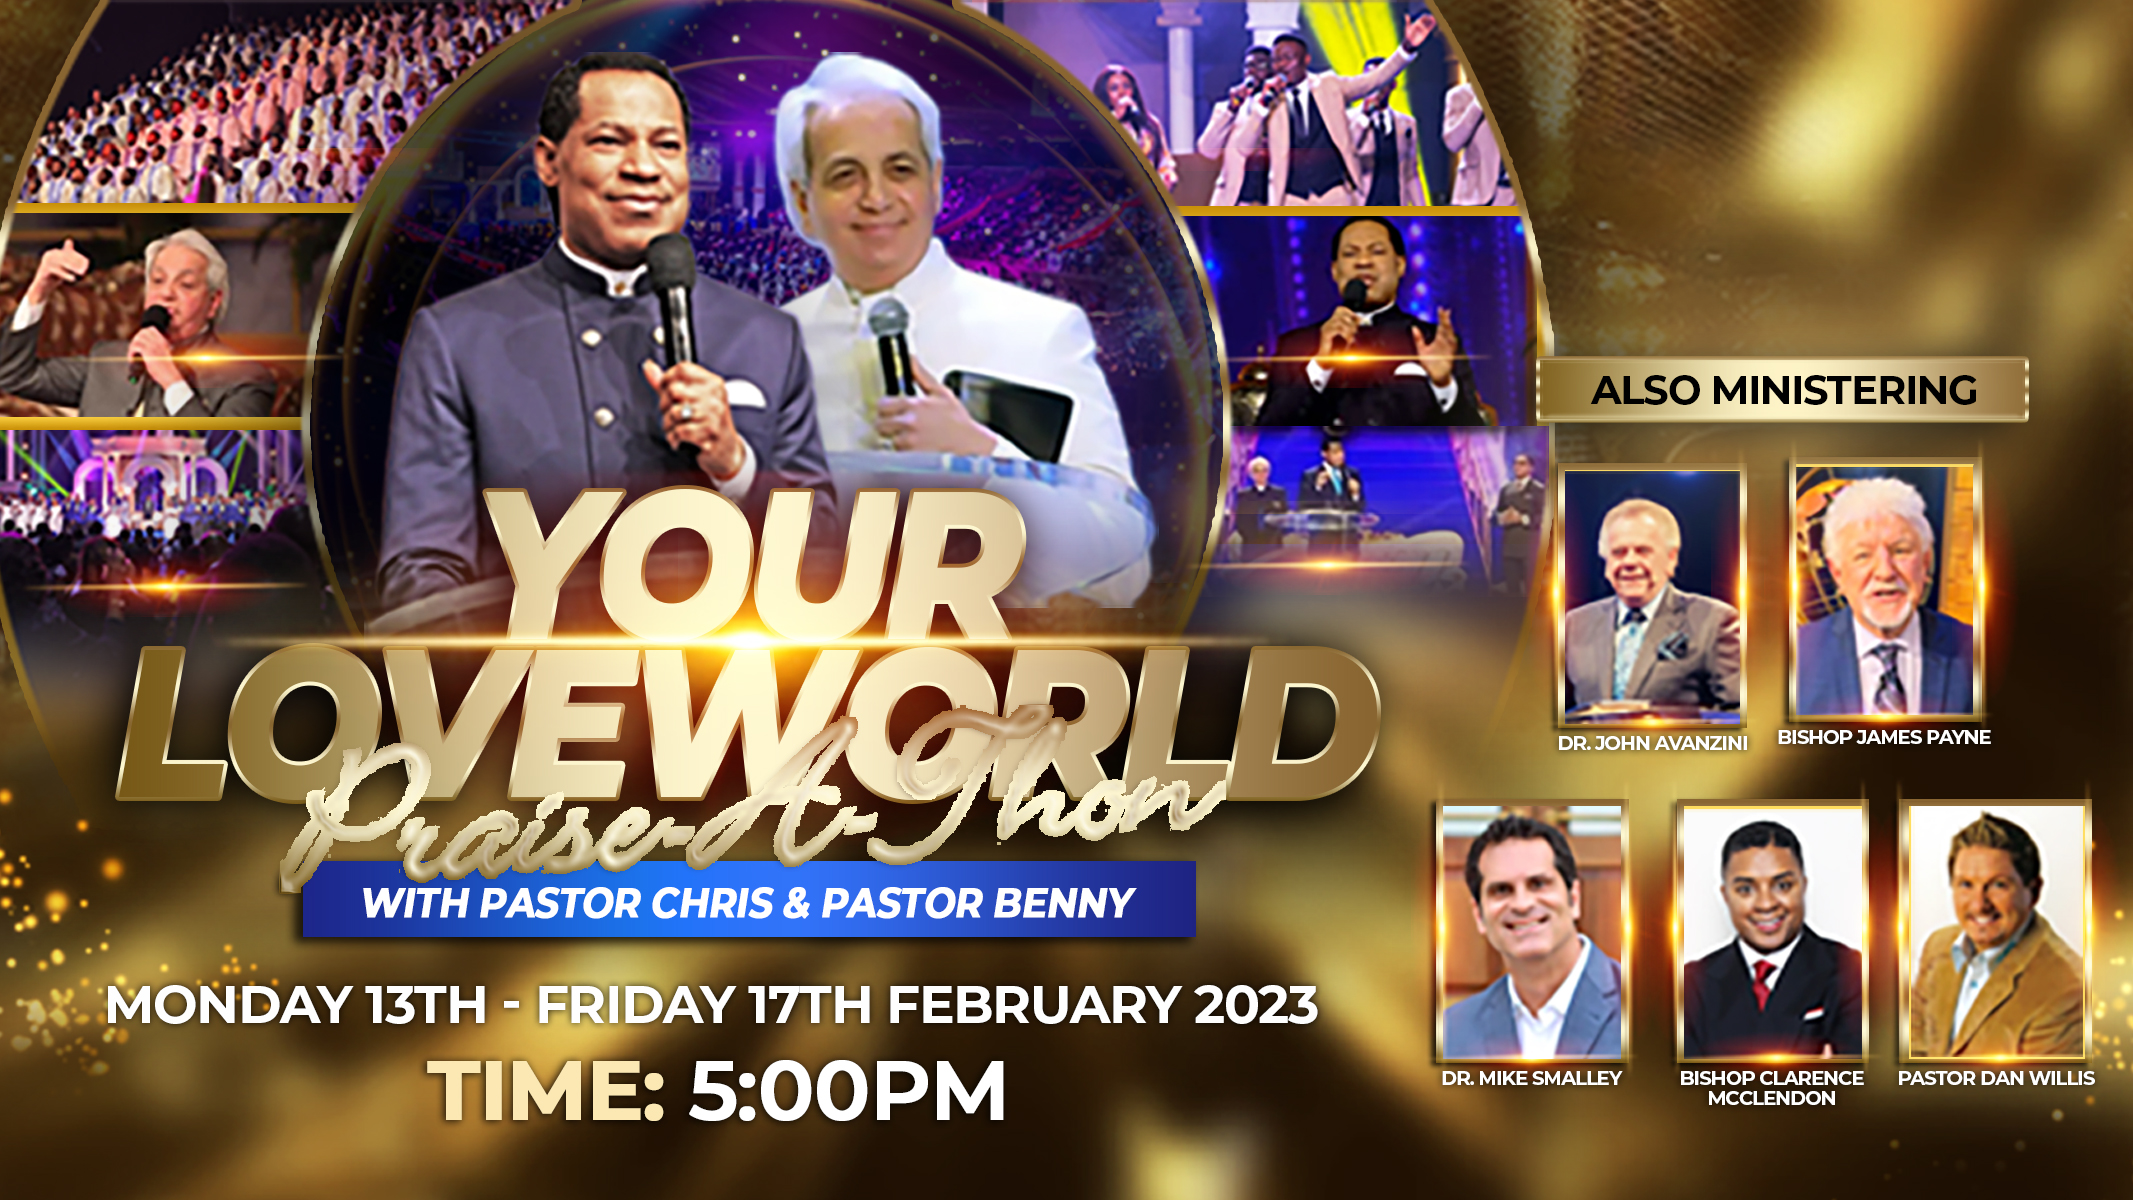 GEAR UP FOR YOUR LOVEWORLD PRAISE-A-THON WITH PASTOR CHRIS AND PASTOR BENNY HINN